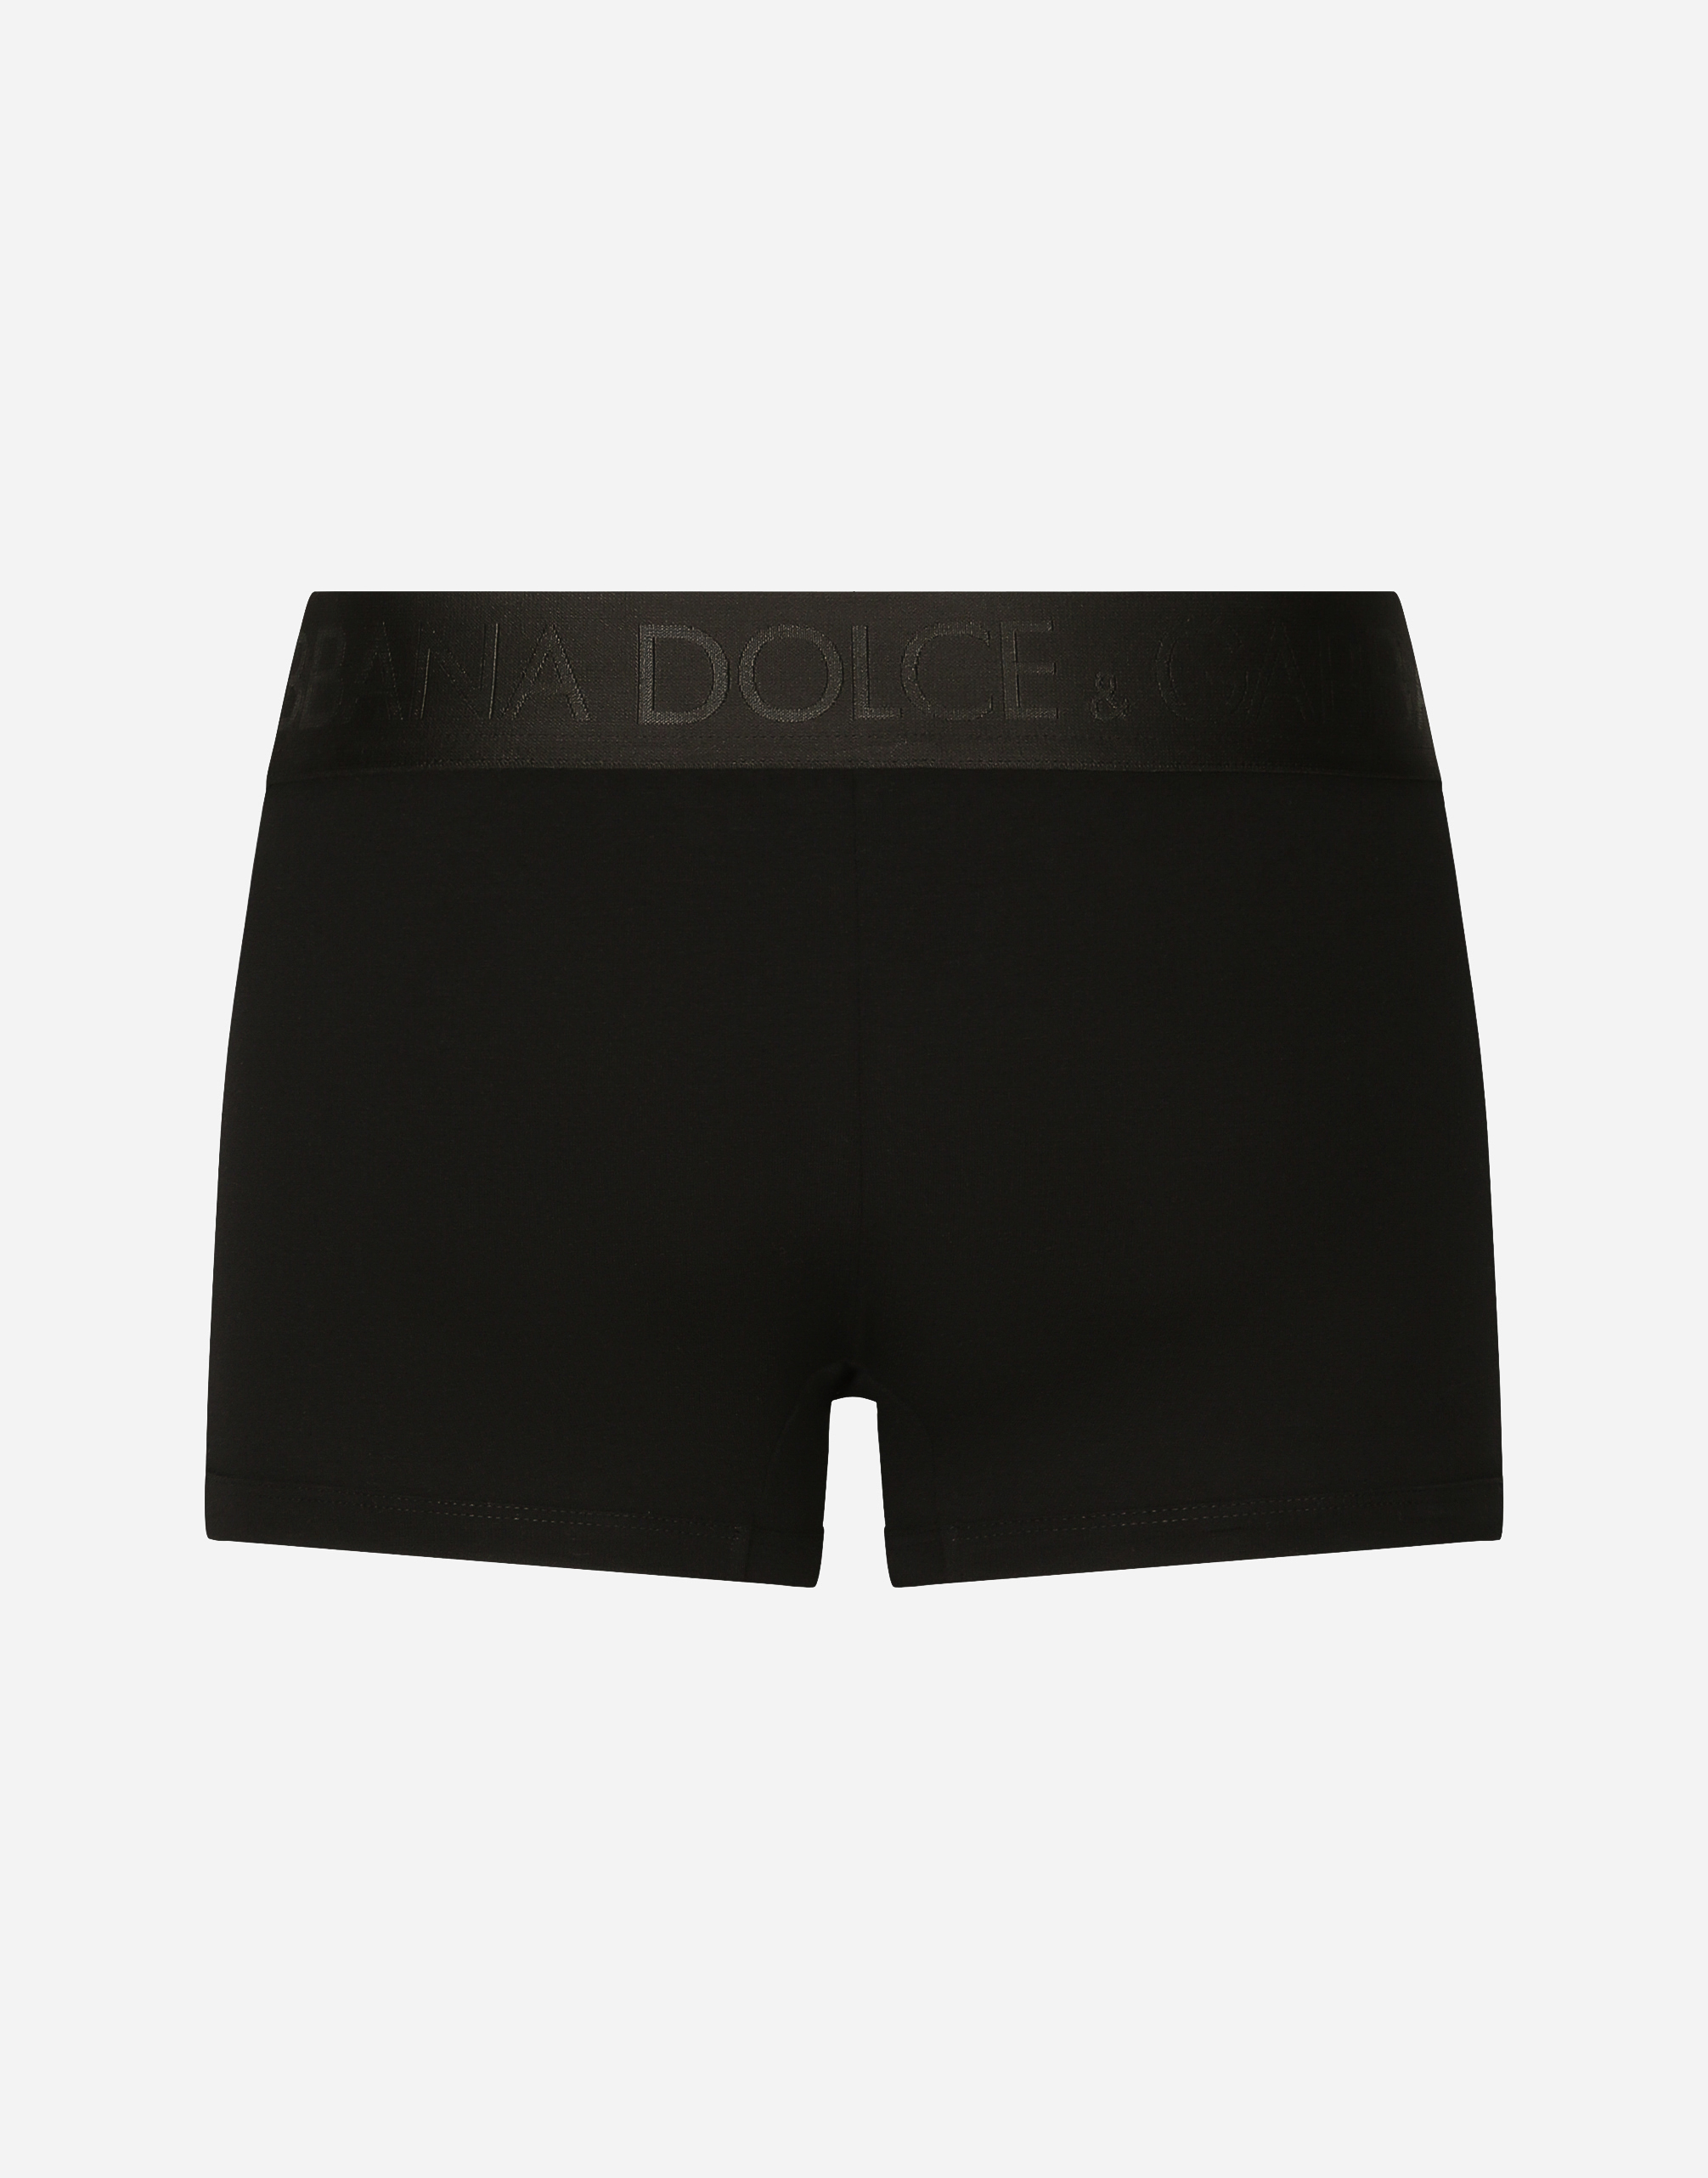 Two-way-stretch jersey regular-fit boxers in Black for for Men